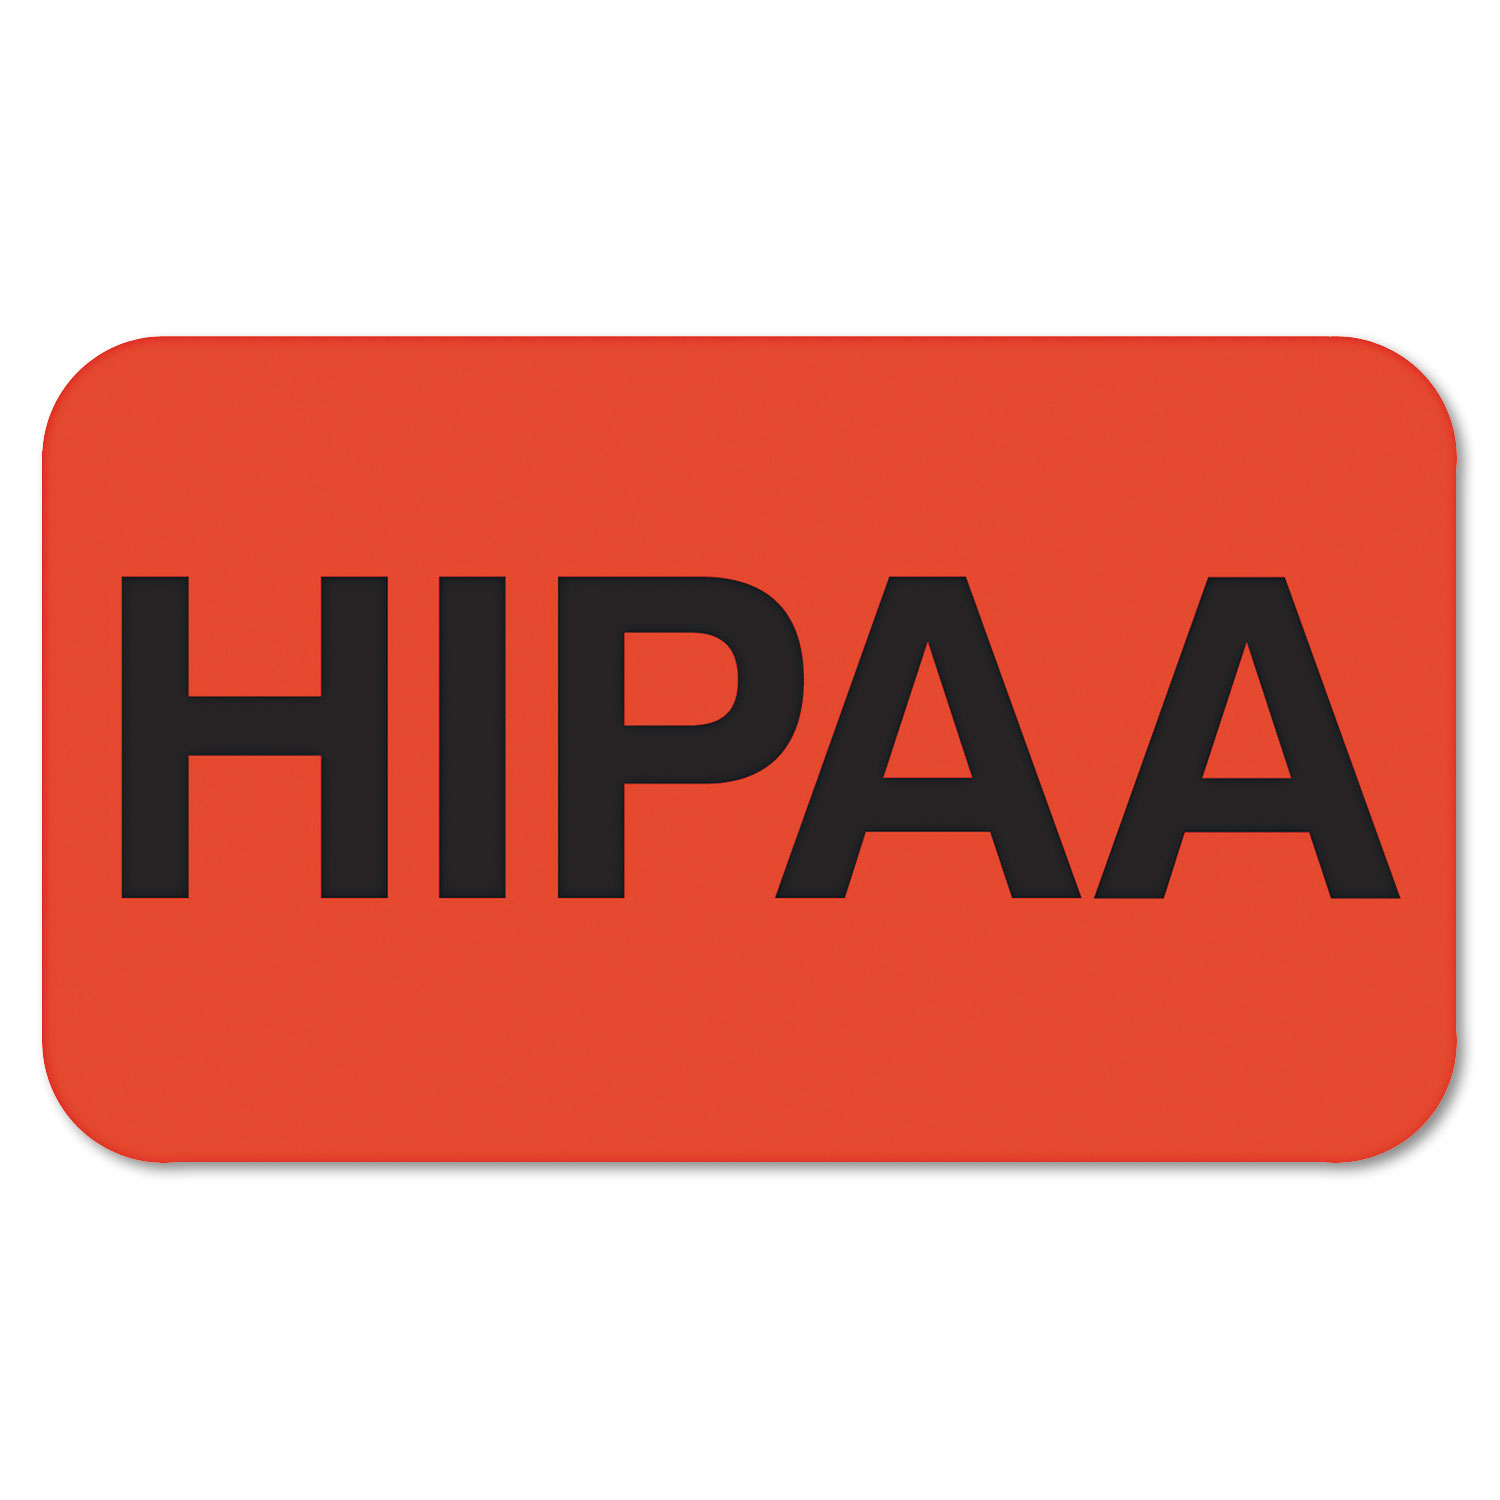 Medical Labels for HIPAA, 7/8 x 1-1/2, Orange, 250/Roll